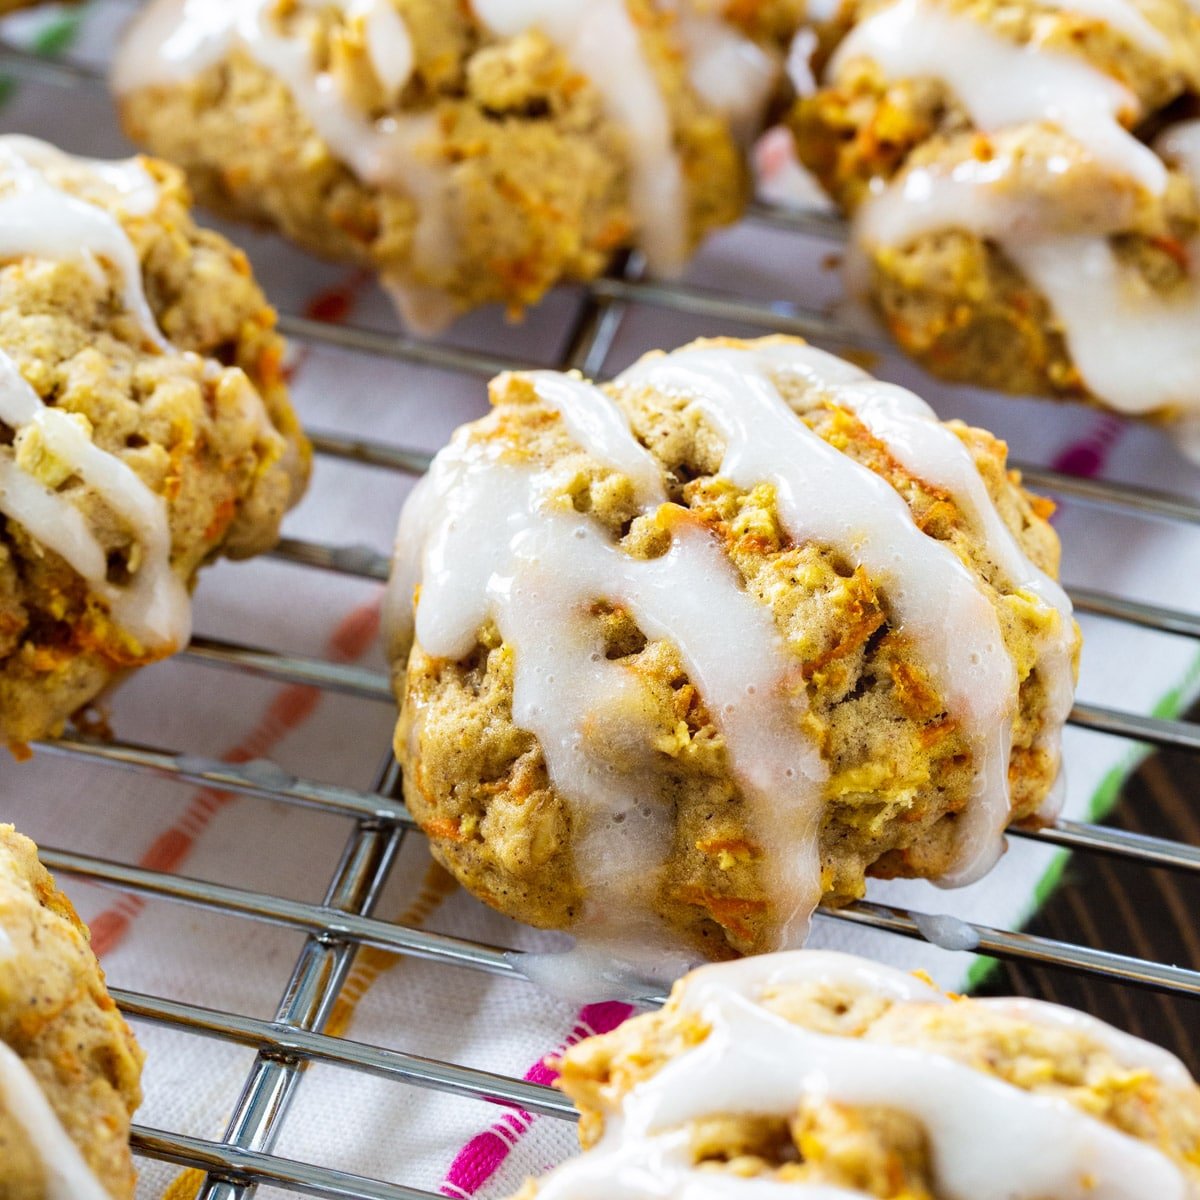 Carrot Cake Cookies on a wire rack.